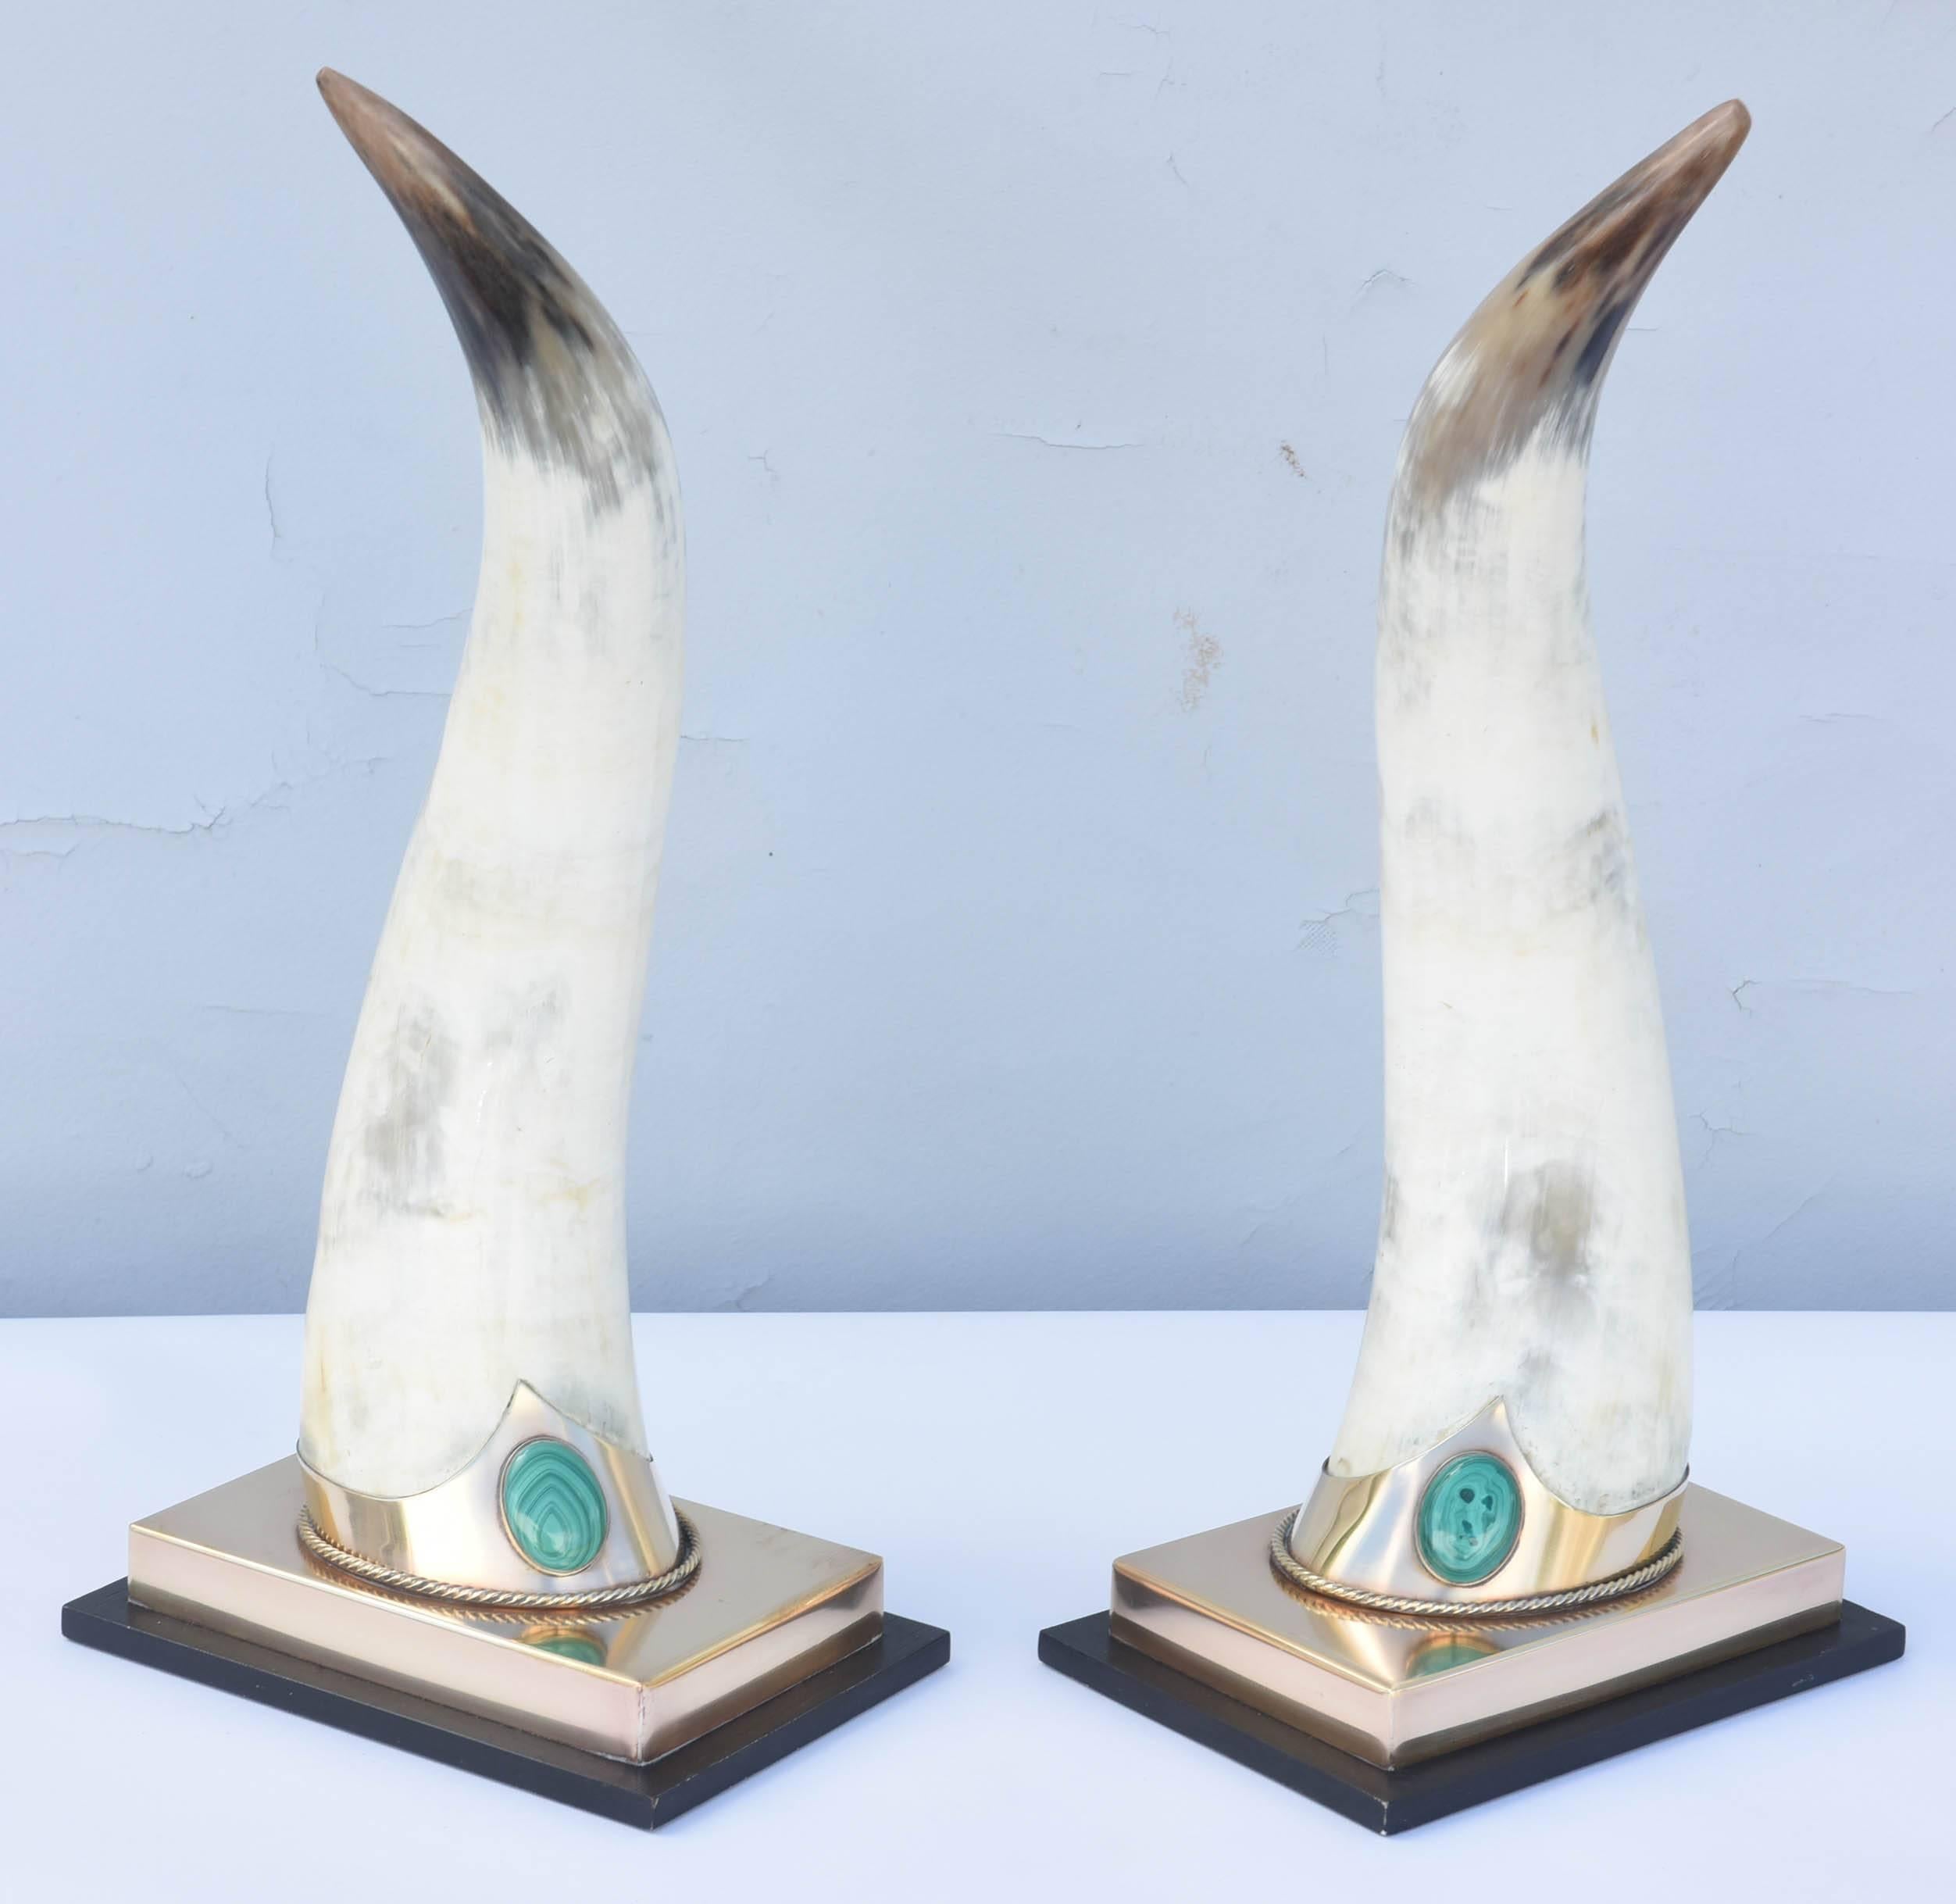 Exceptional pair of one-of-a-kind, mounted, bull horns, in brass collars, adorned with malachite, on graduating rectangular base. Impressed mark 